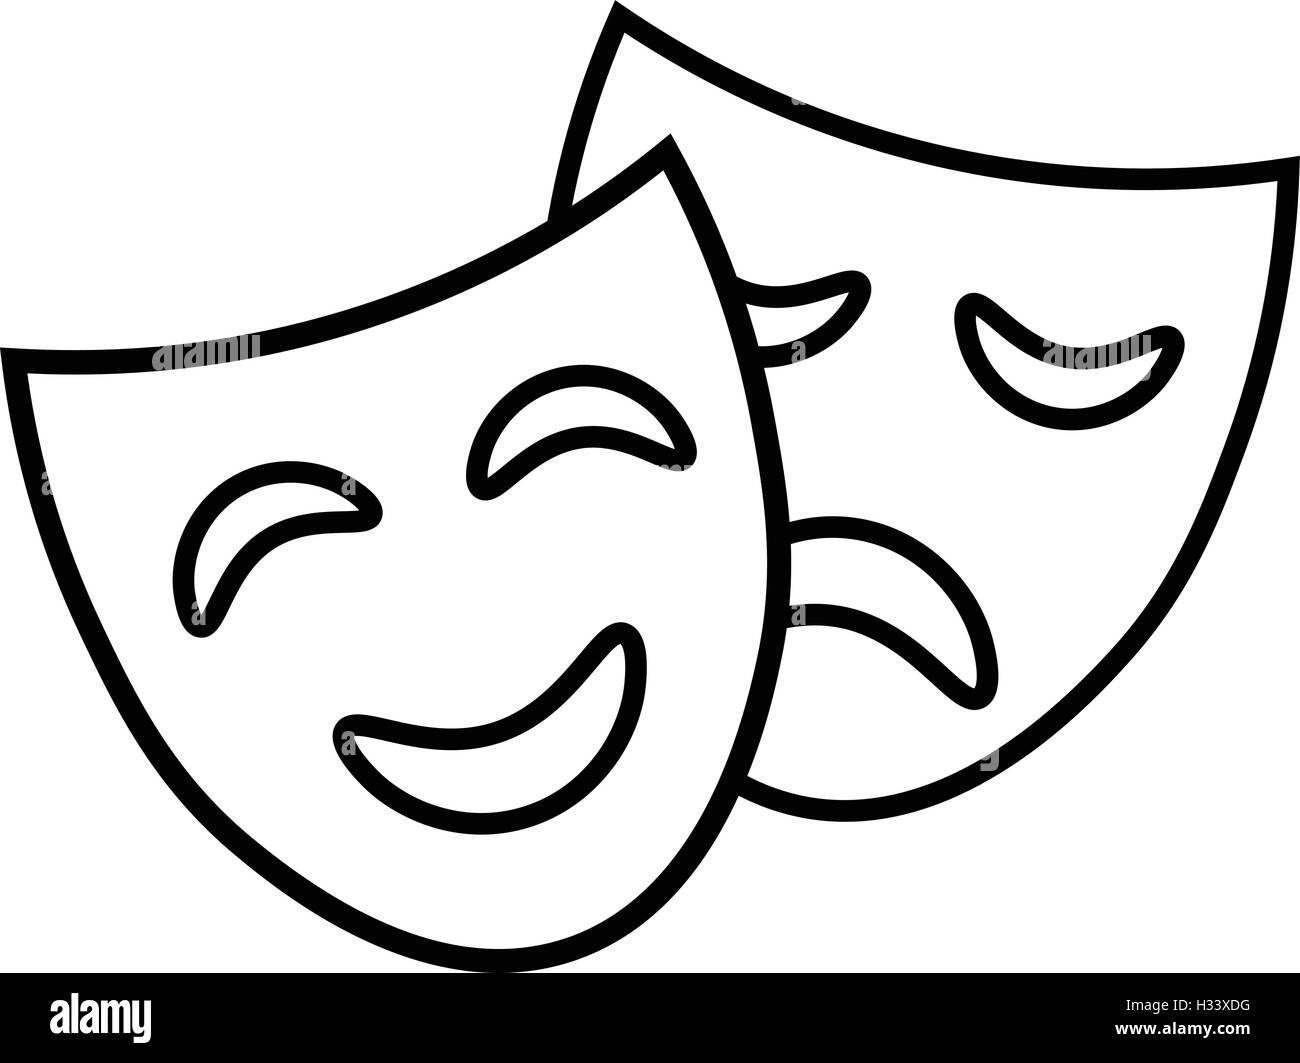 Theater icon, black outlined theater masks, vector illustration. Stock Vector